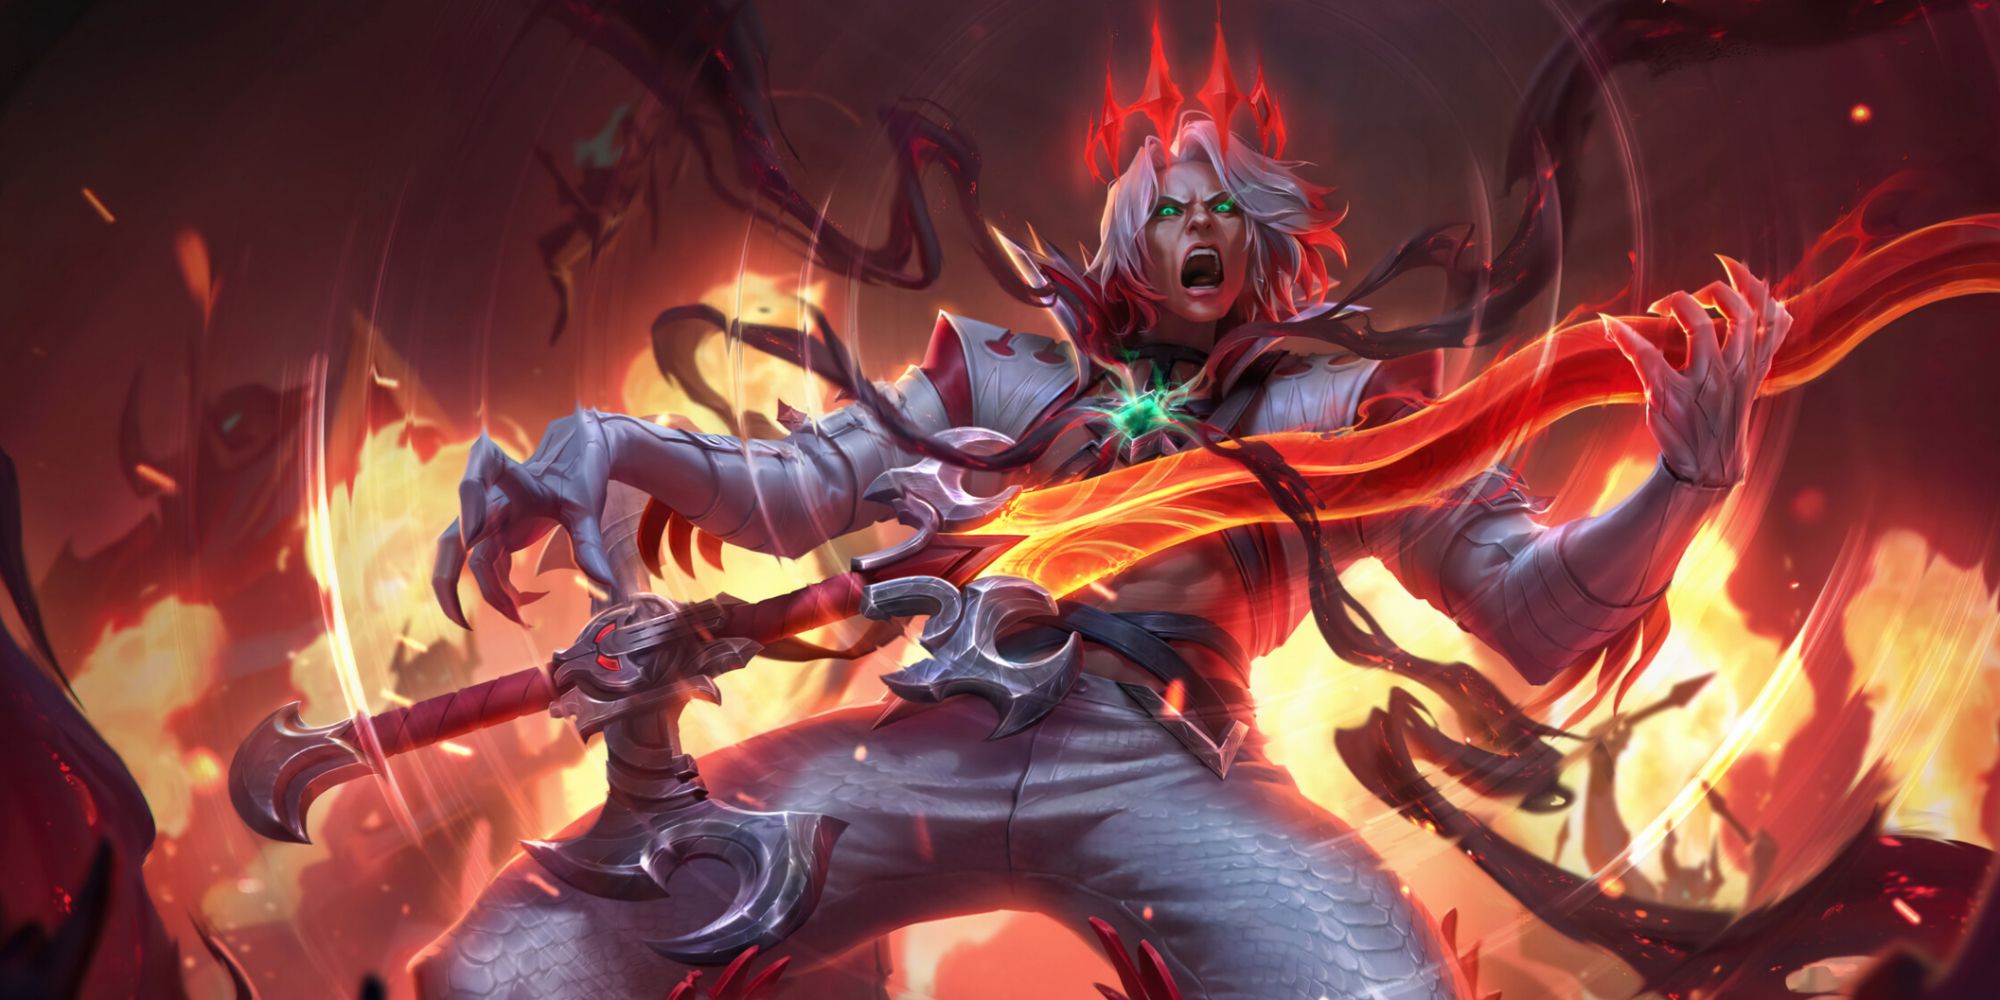 Pentakill Viego getting some riffs with Pentakill with his sword a red crown encircling his head as he wears a white suit